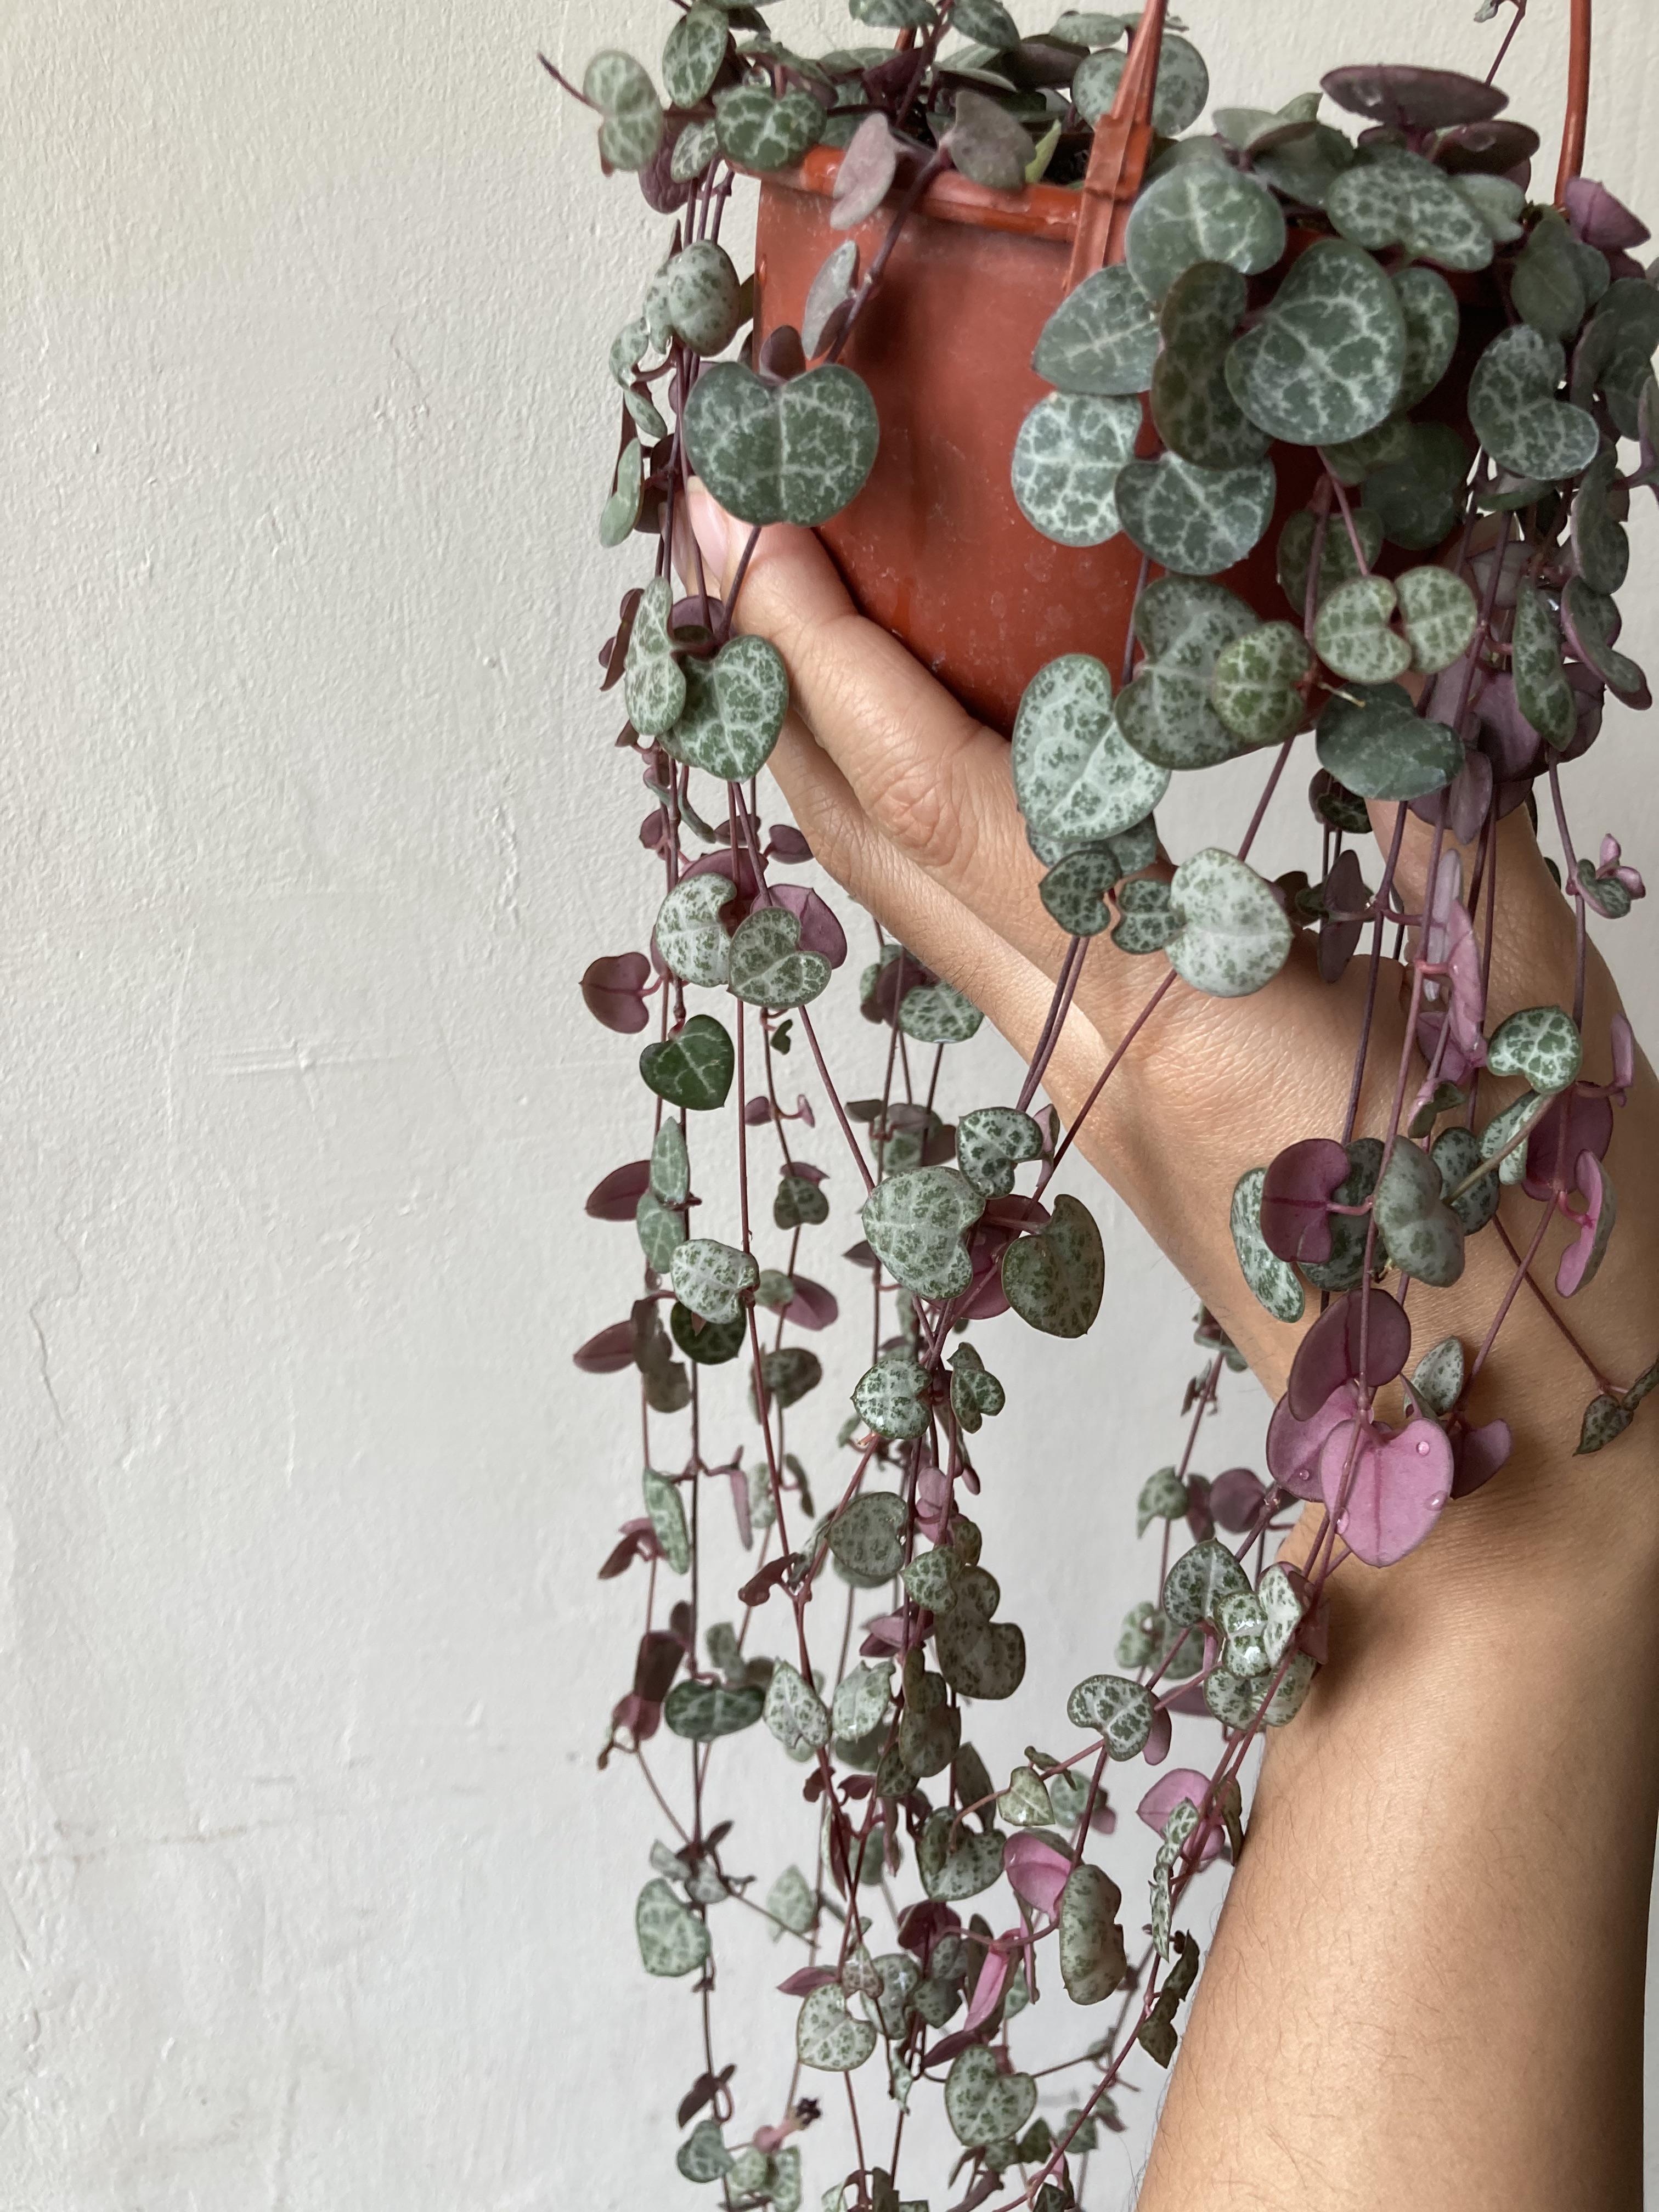 How to Care for String of Hearts (Ceropegia woodii variegata)